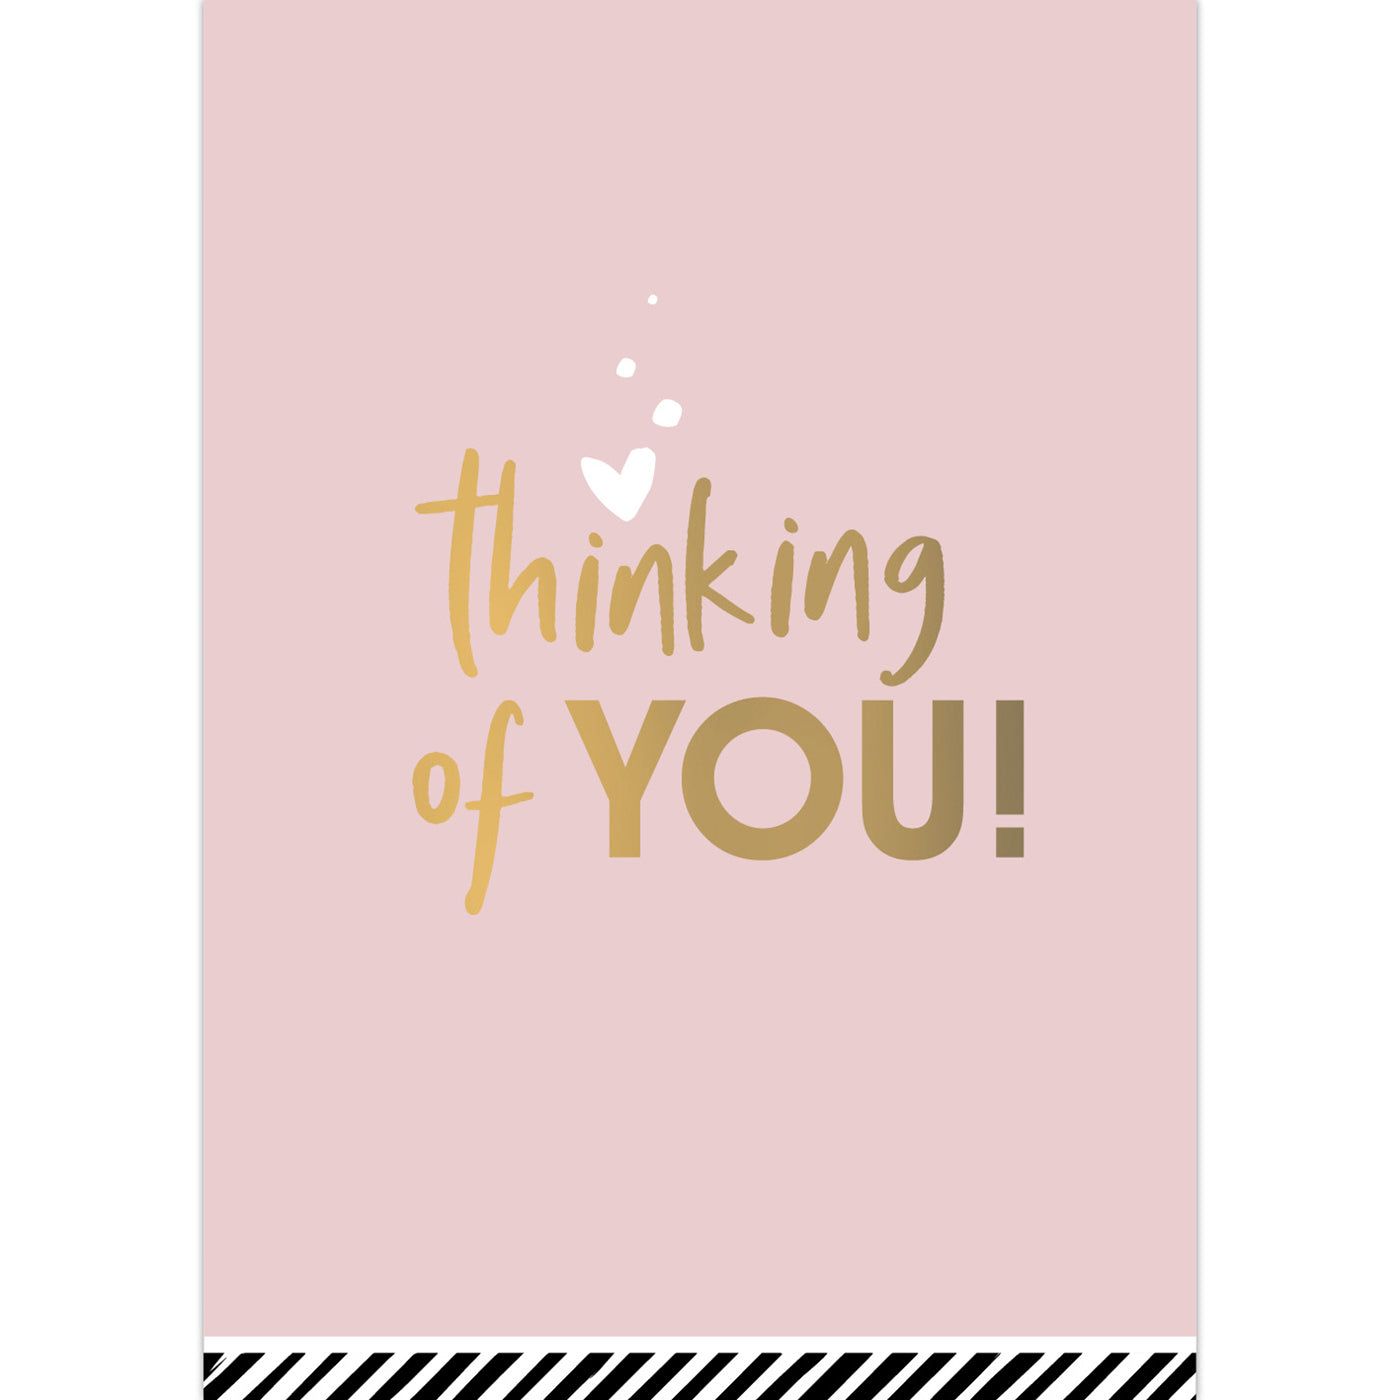 Thinking of you A6 greeting card